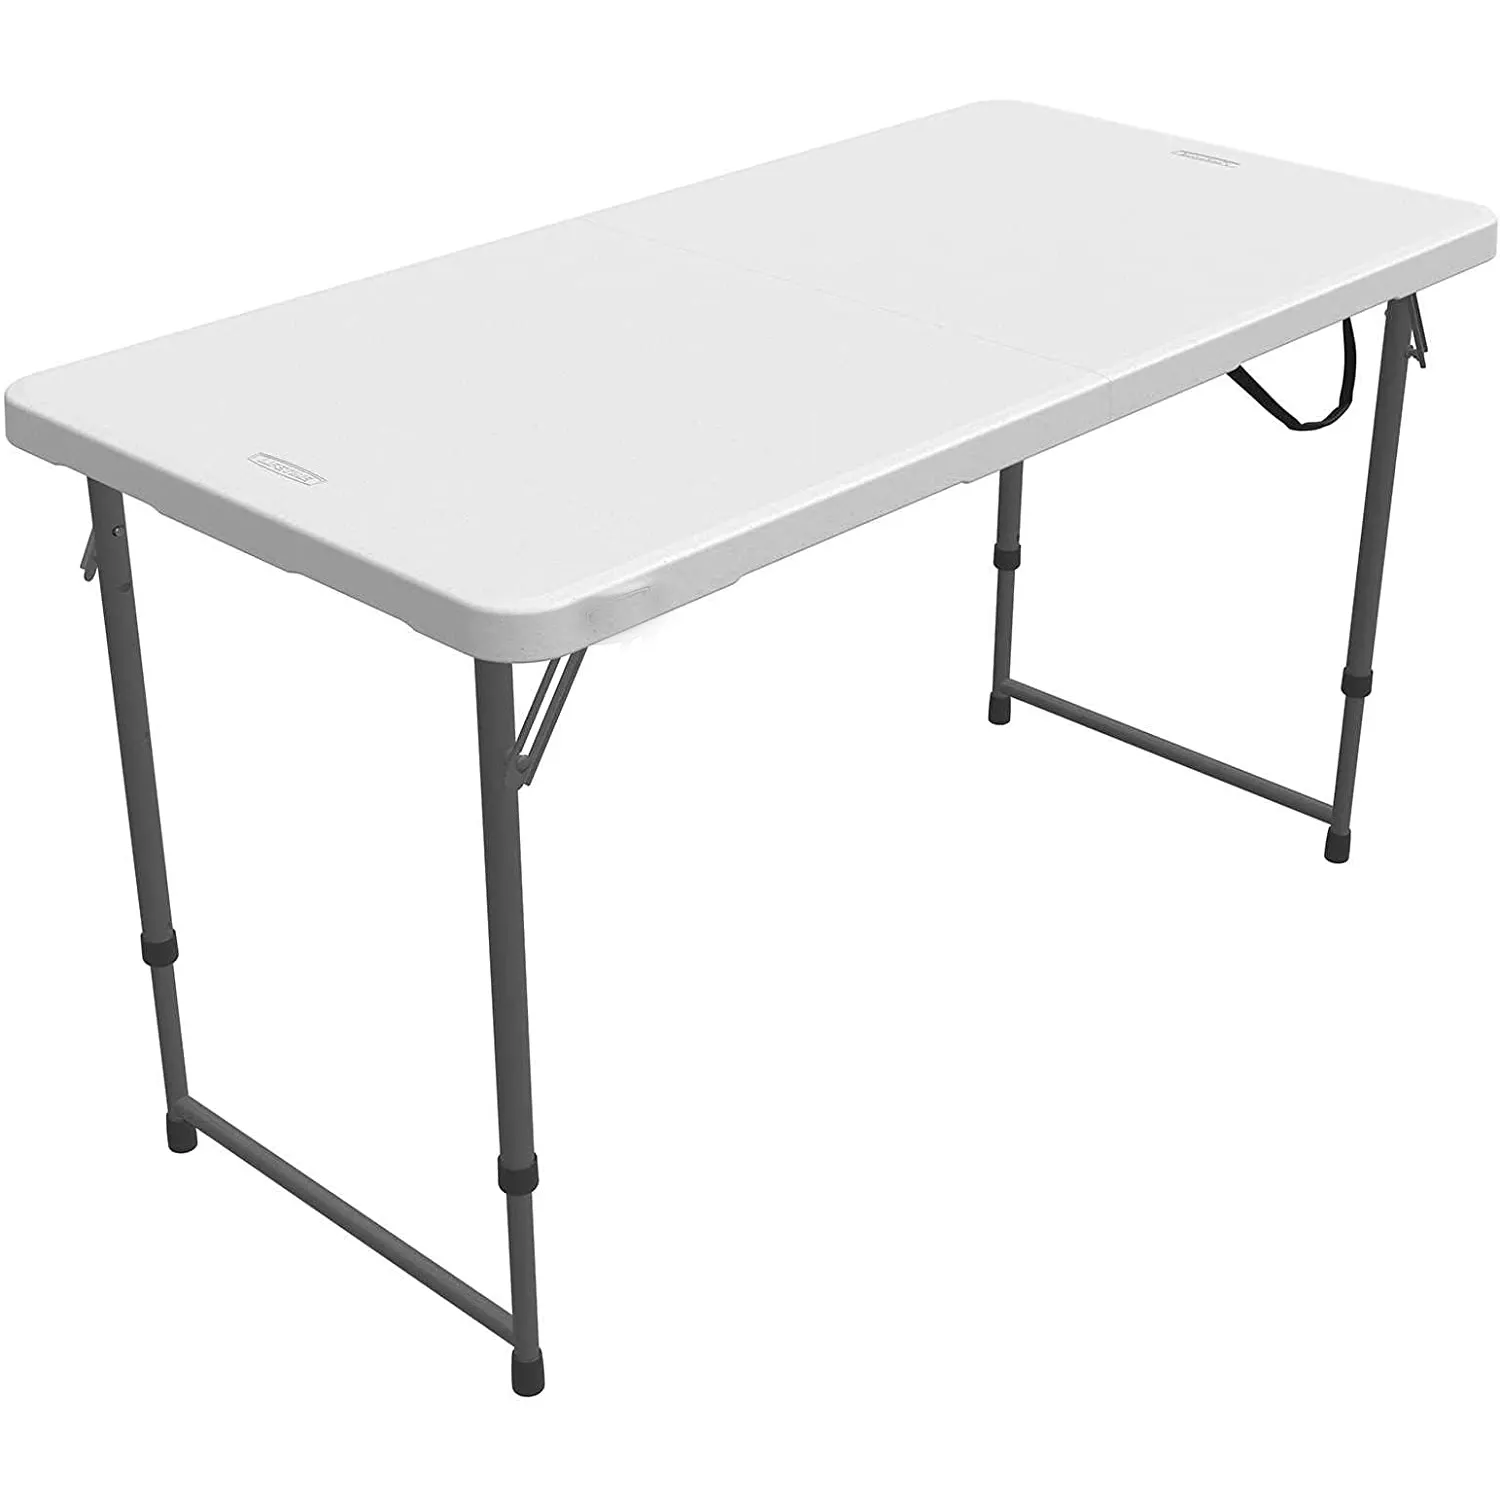 2023 New Height Adjustable Craft Camping and Utility Folding Table, 4 Foot, 4'/48 x 24, White Granite